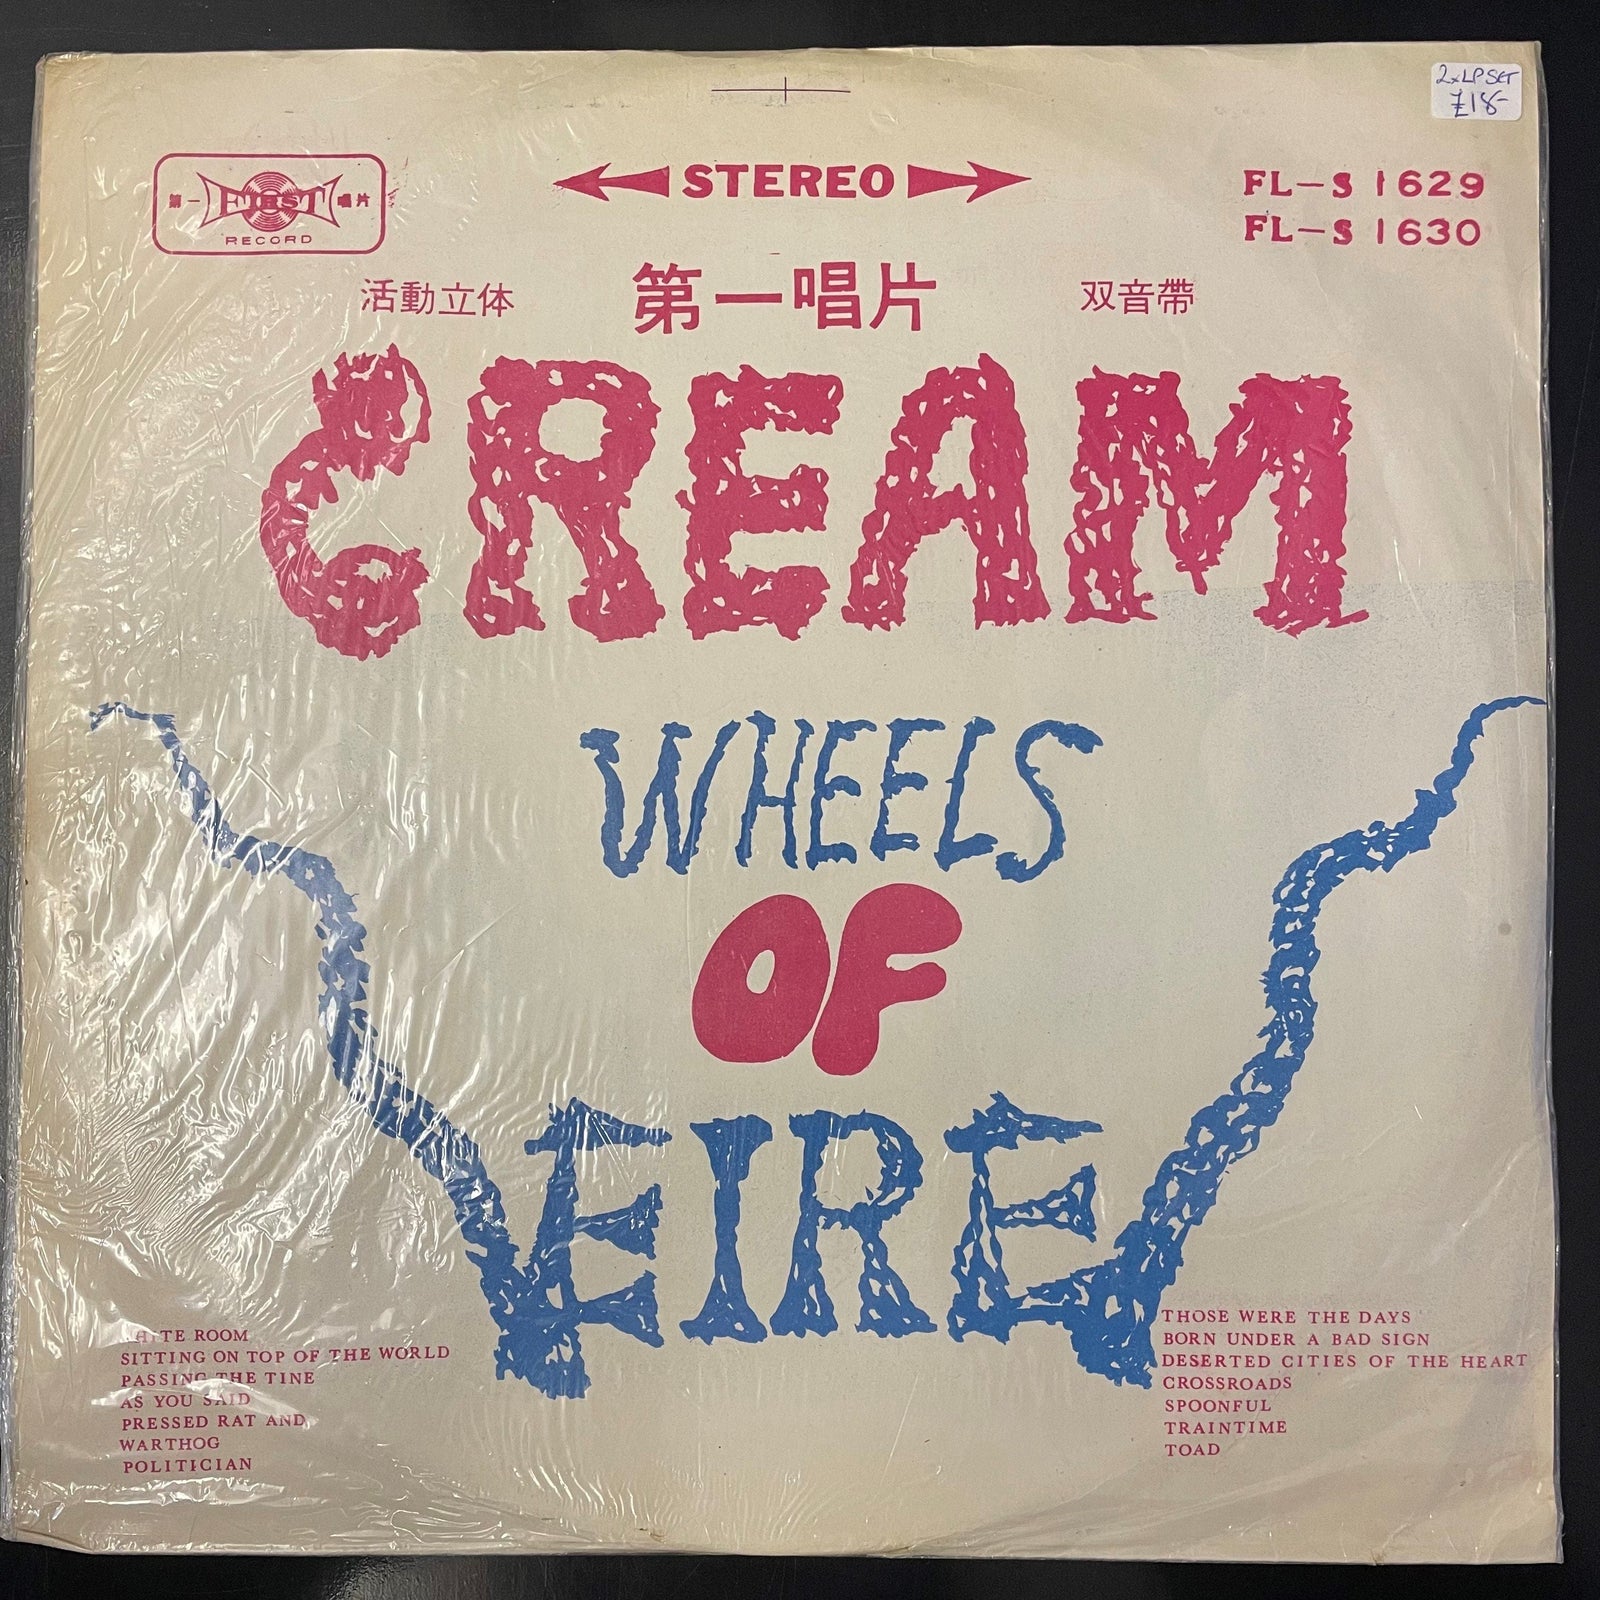 Wheels Of Fire by Cream Taiwanese Pressing